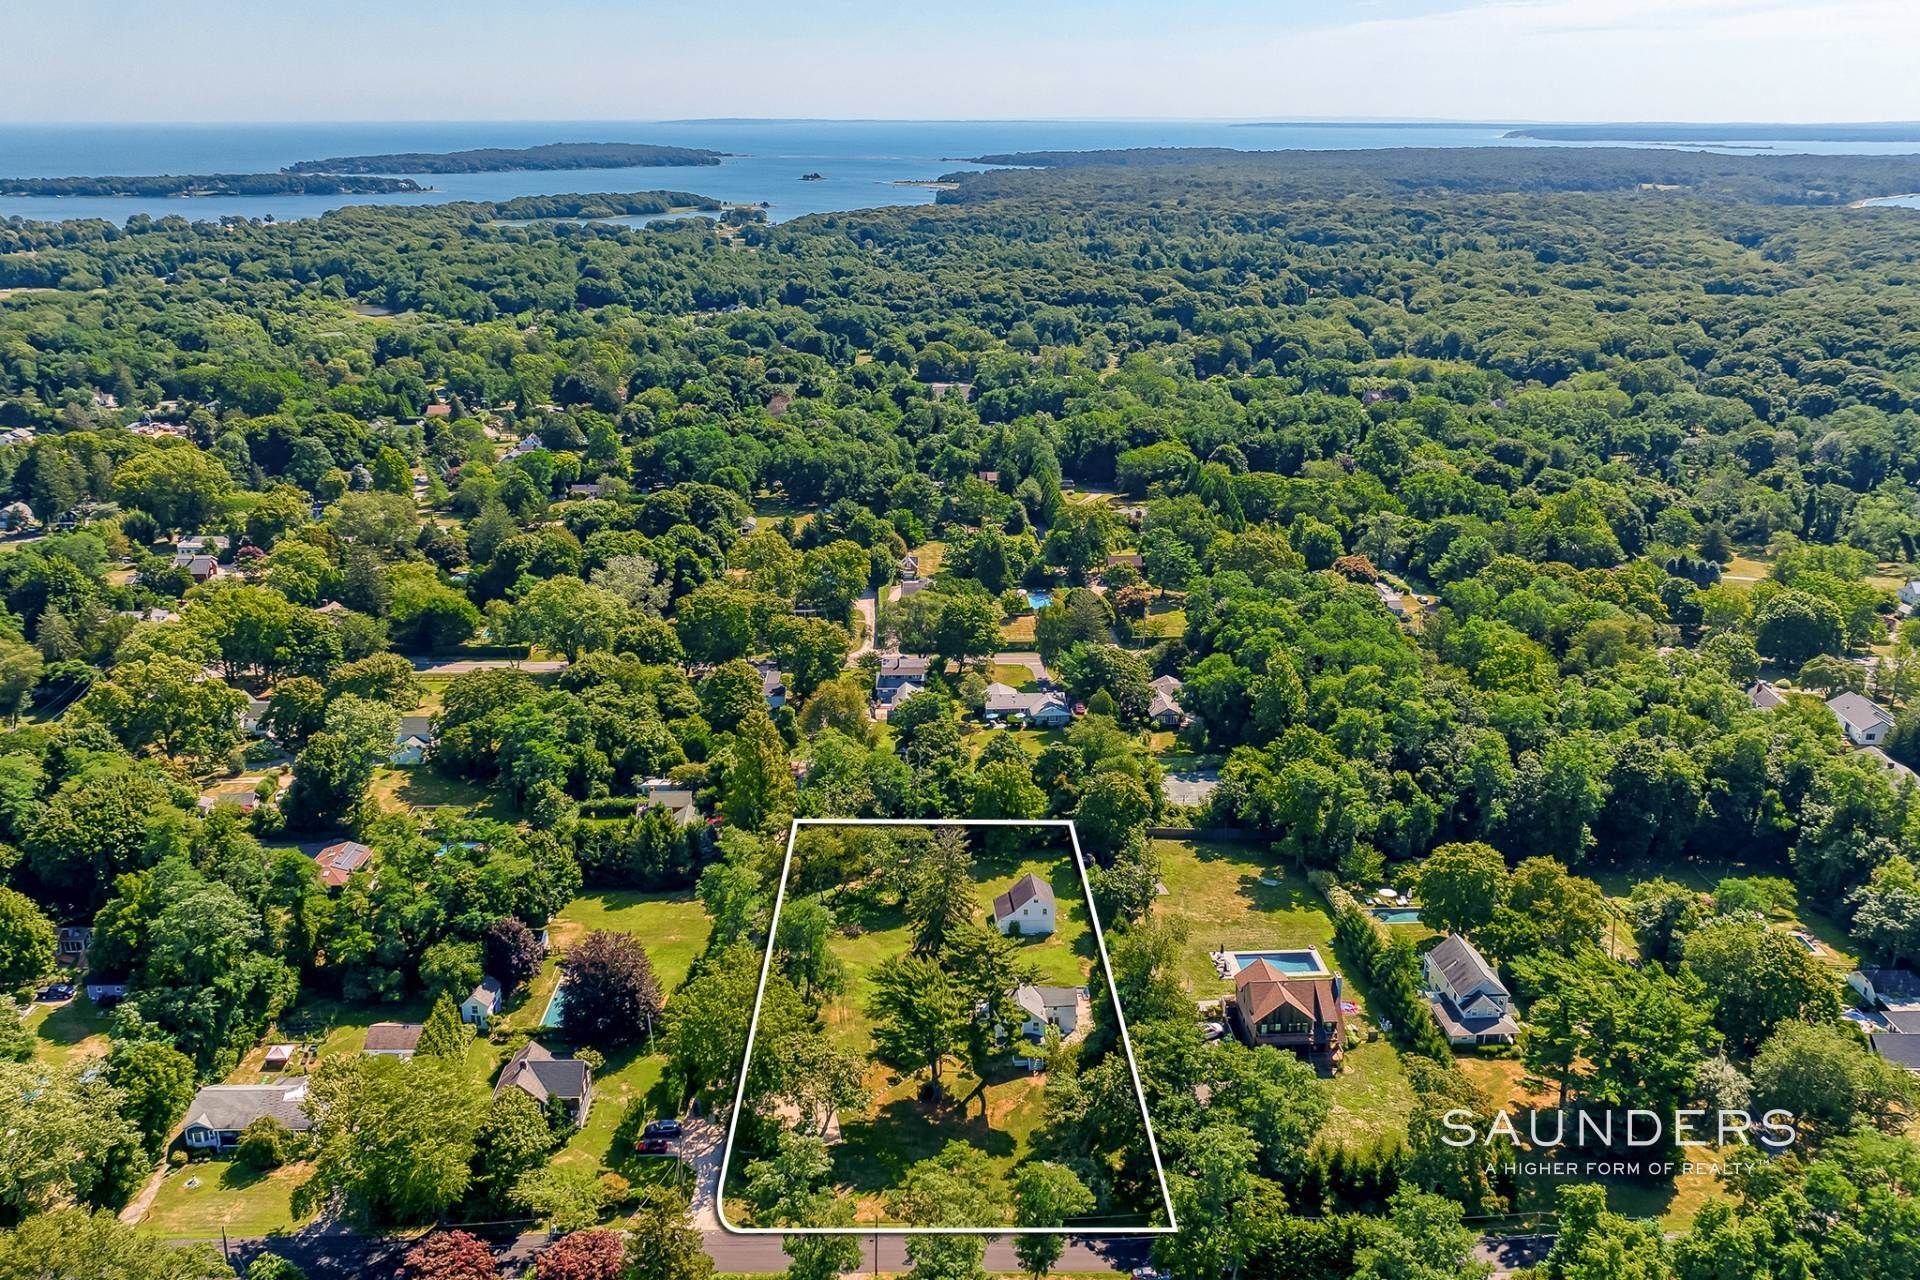 1. Single Family Homes for Sale at Shelter Island Restored 1900 Farmhouse With Barn 9 Sunshine Road, Shelter Island, NY 11964